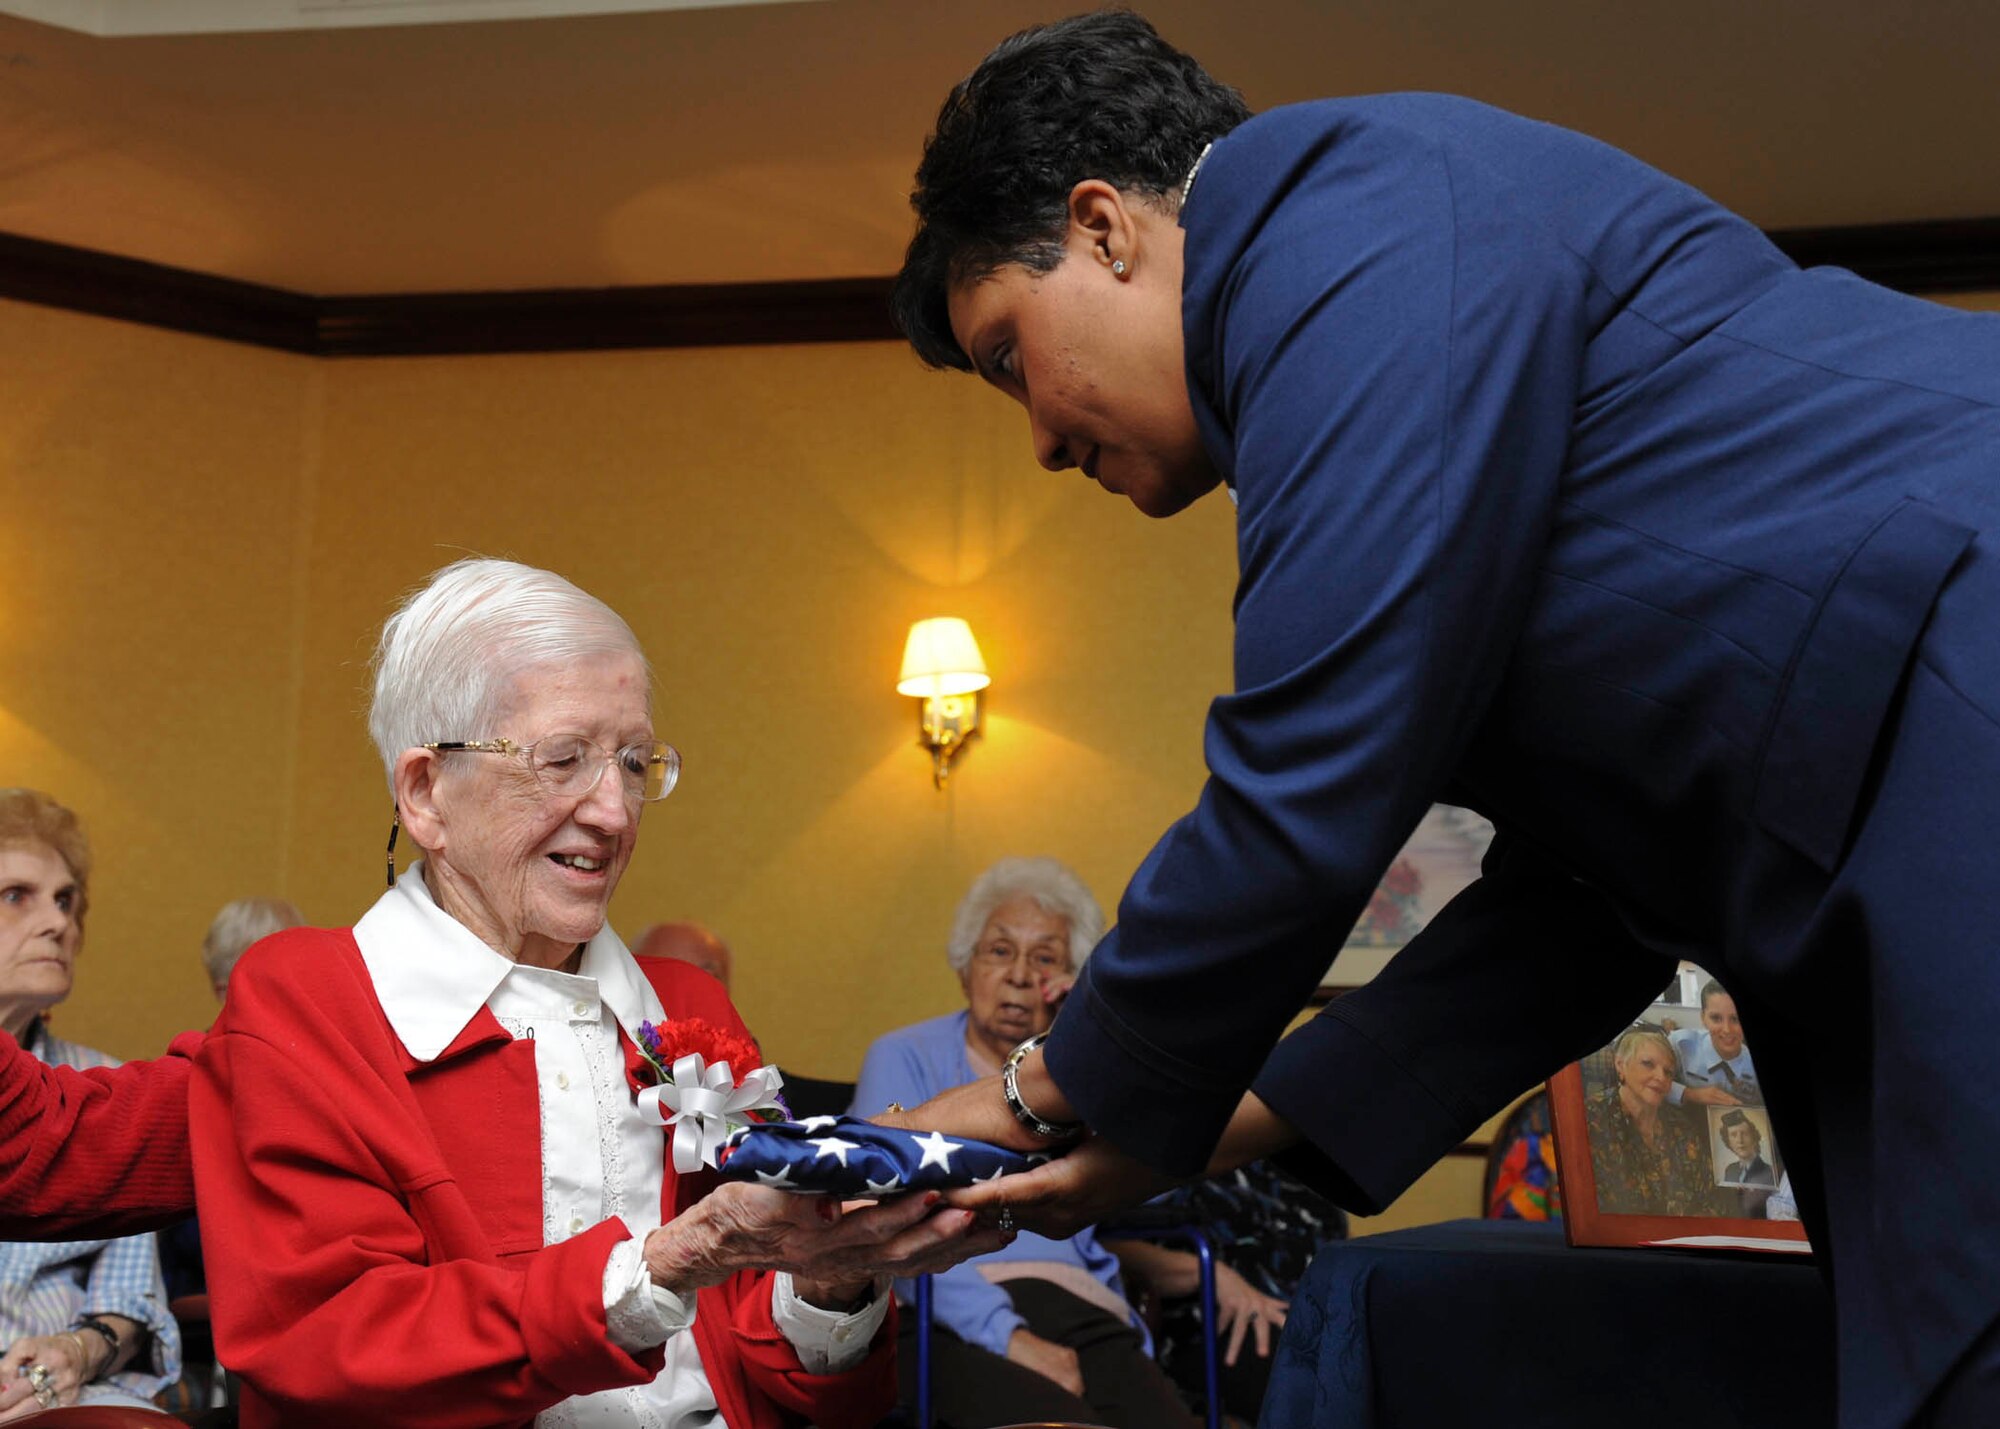 Col. Yolanda Bledsoe, 56th Medical Group commander, presents 98-year-old retired Maj. Anna “Det” Dorsey a flag during a ceremony Oct. 27 at Freedom Inn in Sun City West. The flag was flown over the USS Arizona Memorial in Pearl Harbor in her honor. When the United States entered World War II, Dorsey was one of the fewer than 1,000 nurses in the U.S. Army.   (U.S. Air Force photoy by Senior Airman Darlene Seltmann)